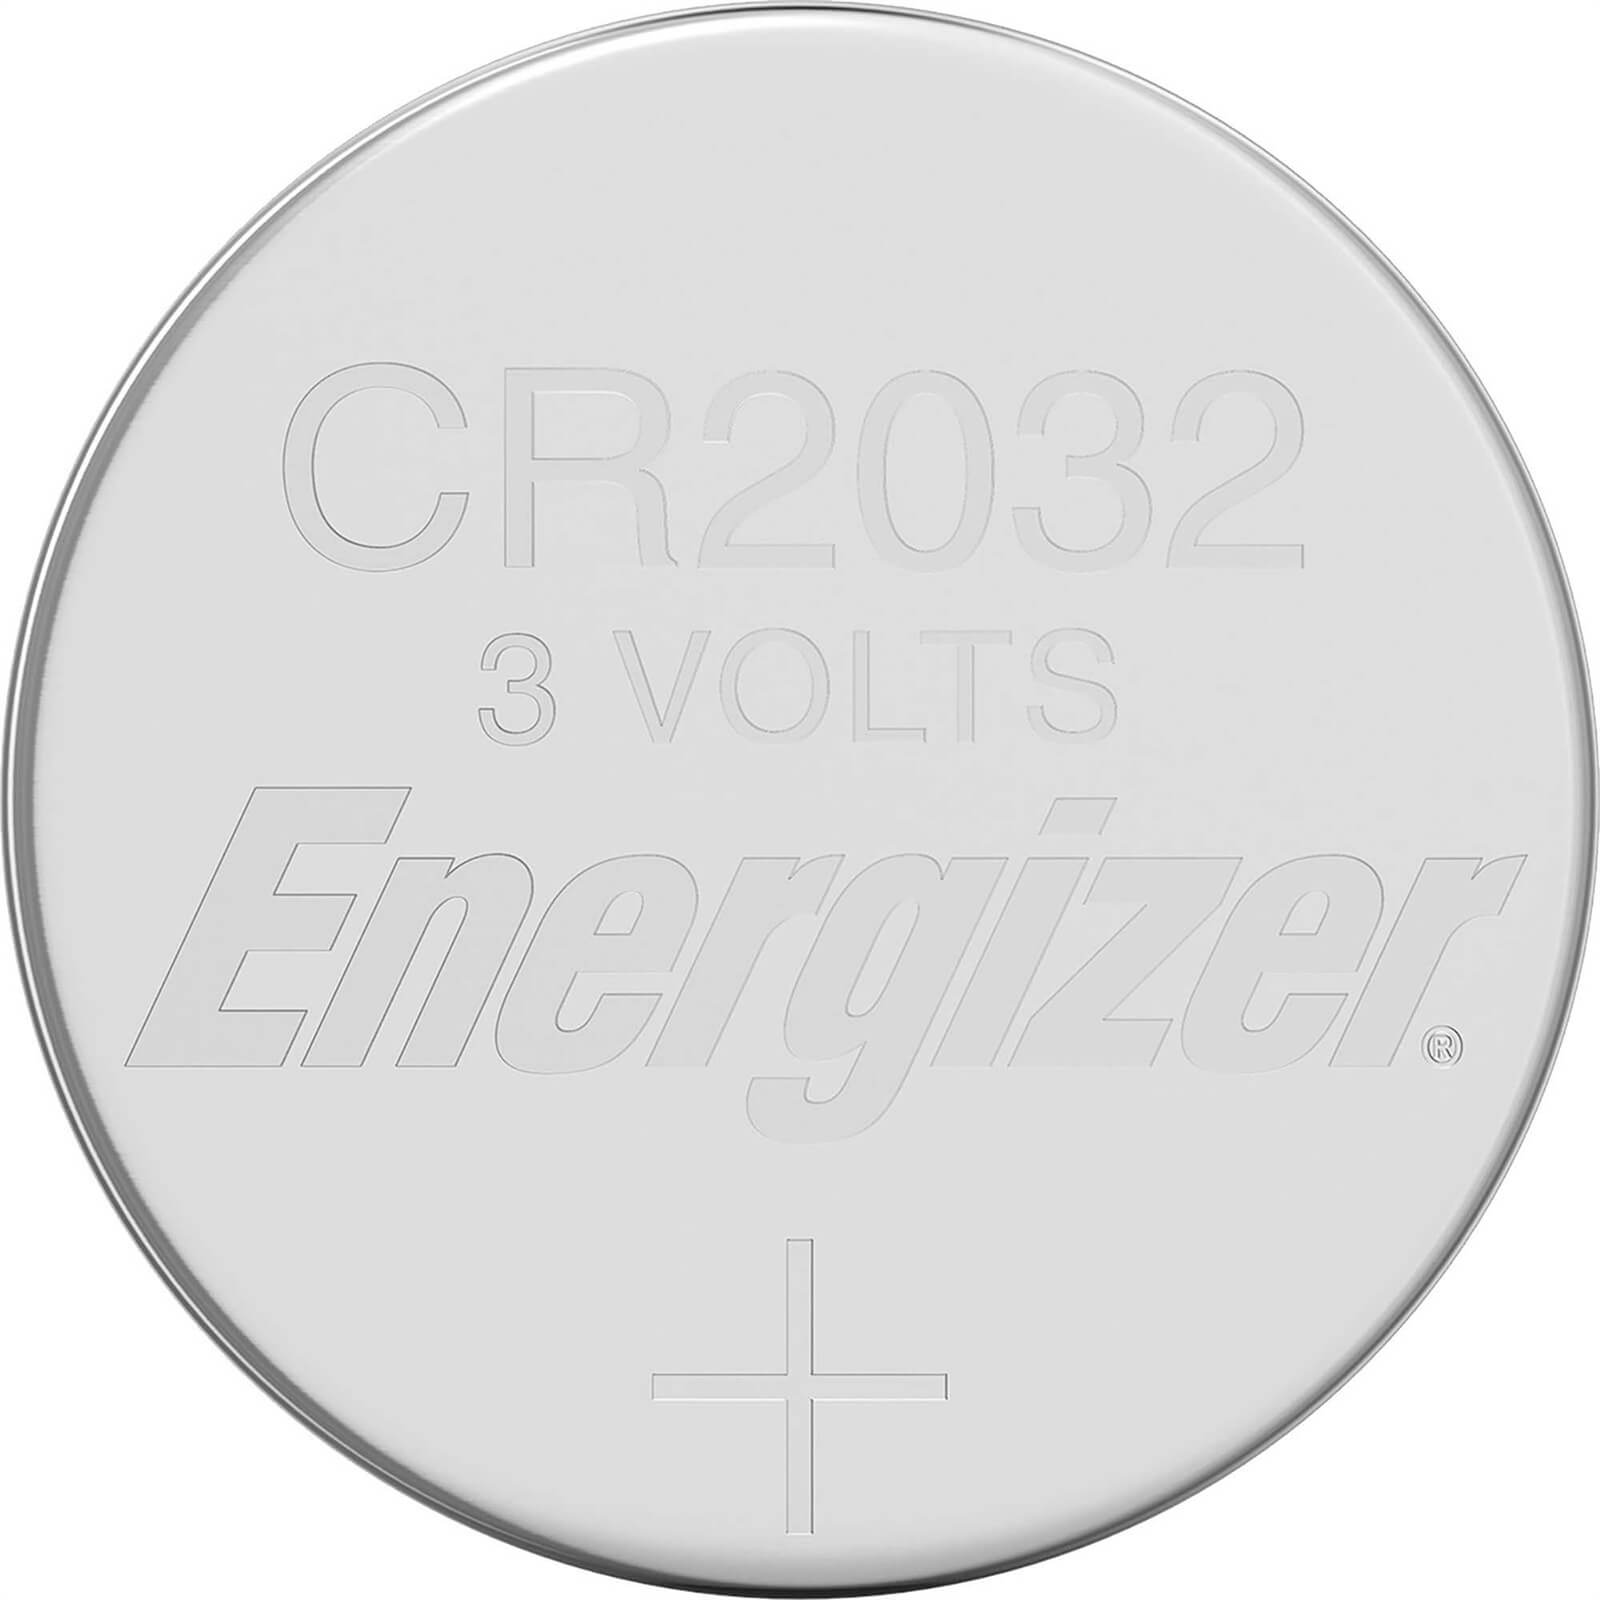 Energizer CR2032 Ultimate Lithium Coin Battery - 2 Pack